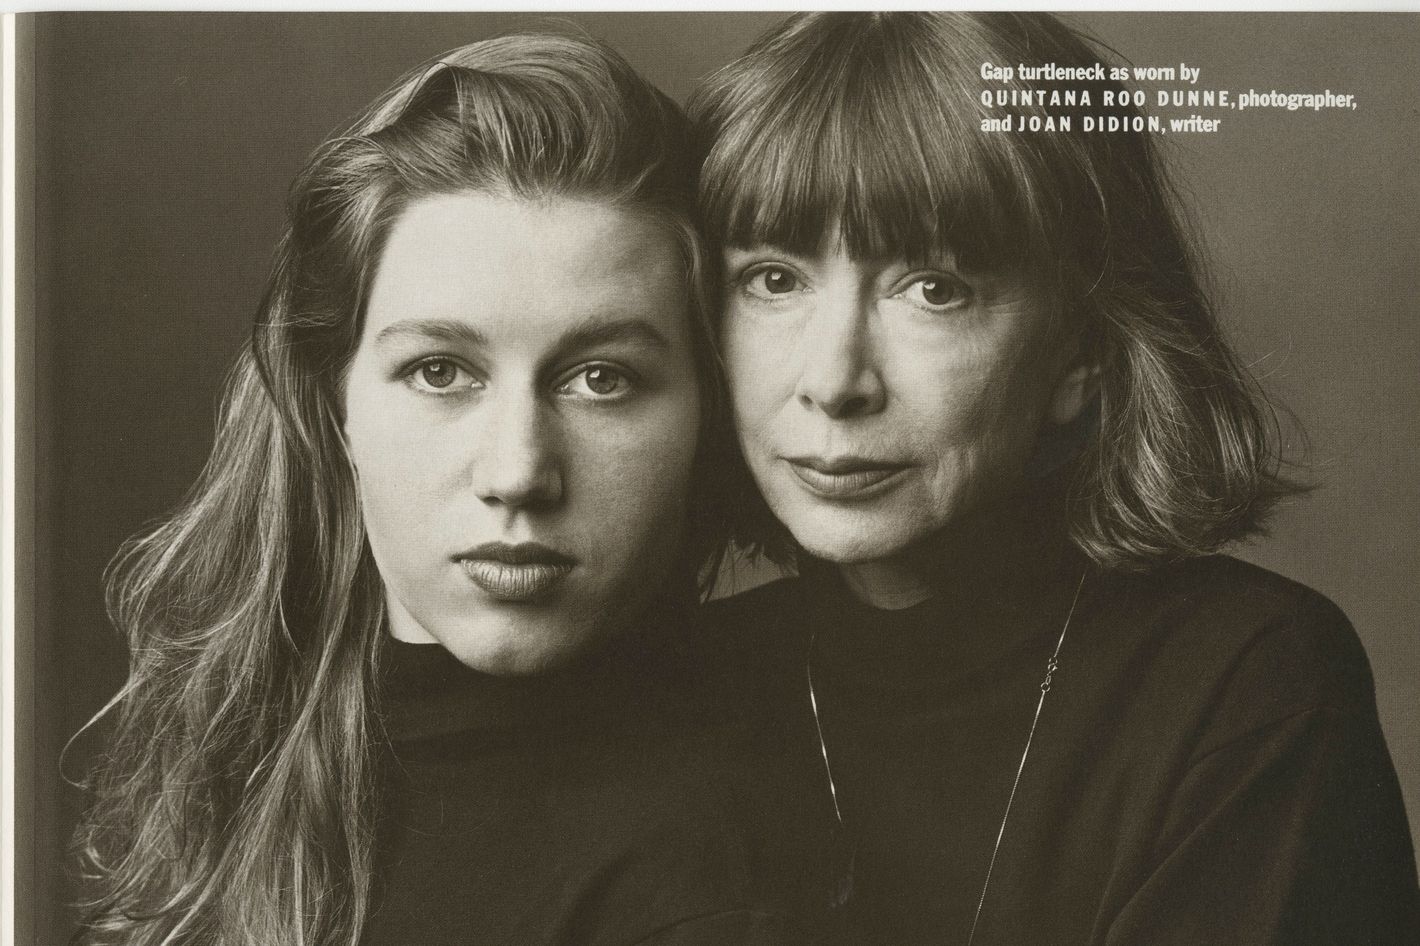 See the 1989 Gap Ad Starring Joan Didion